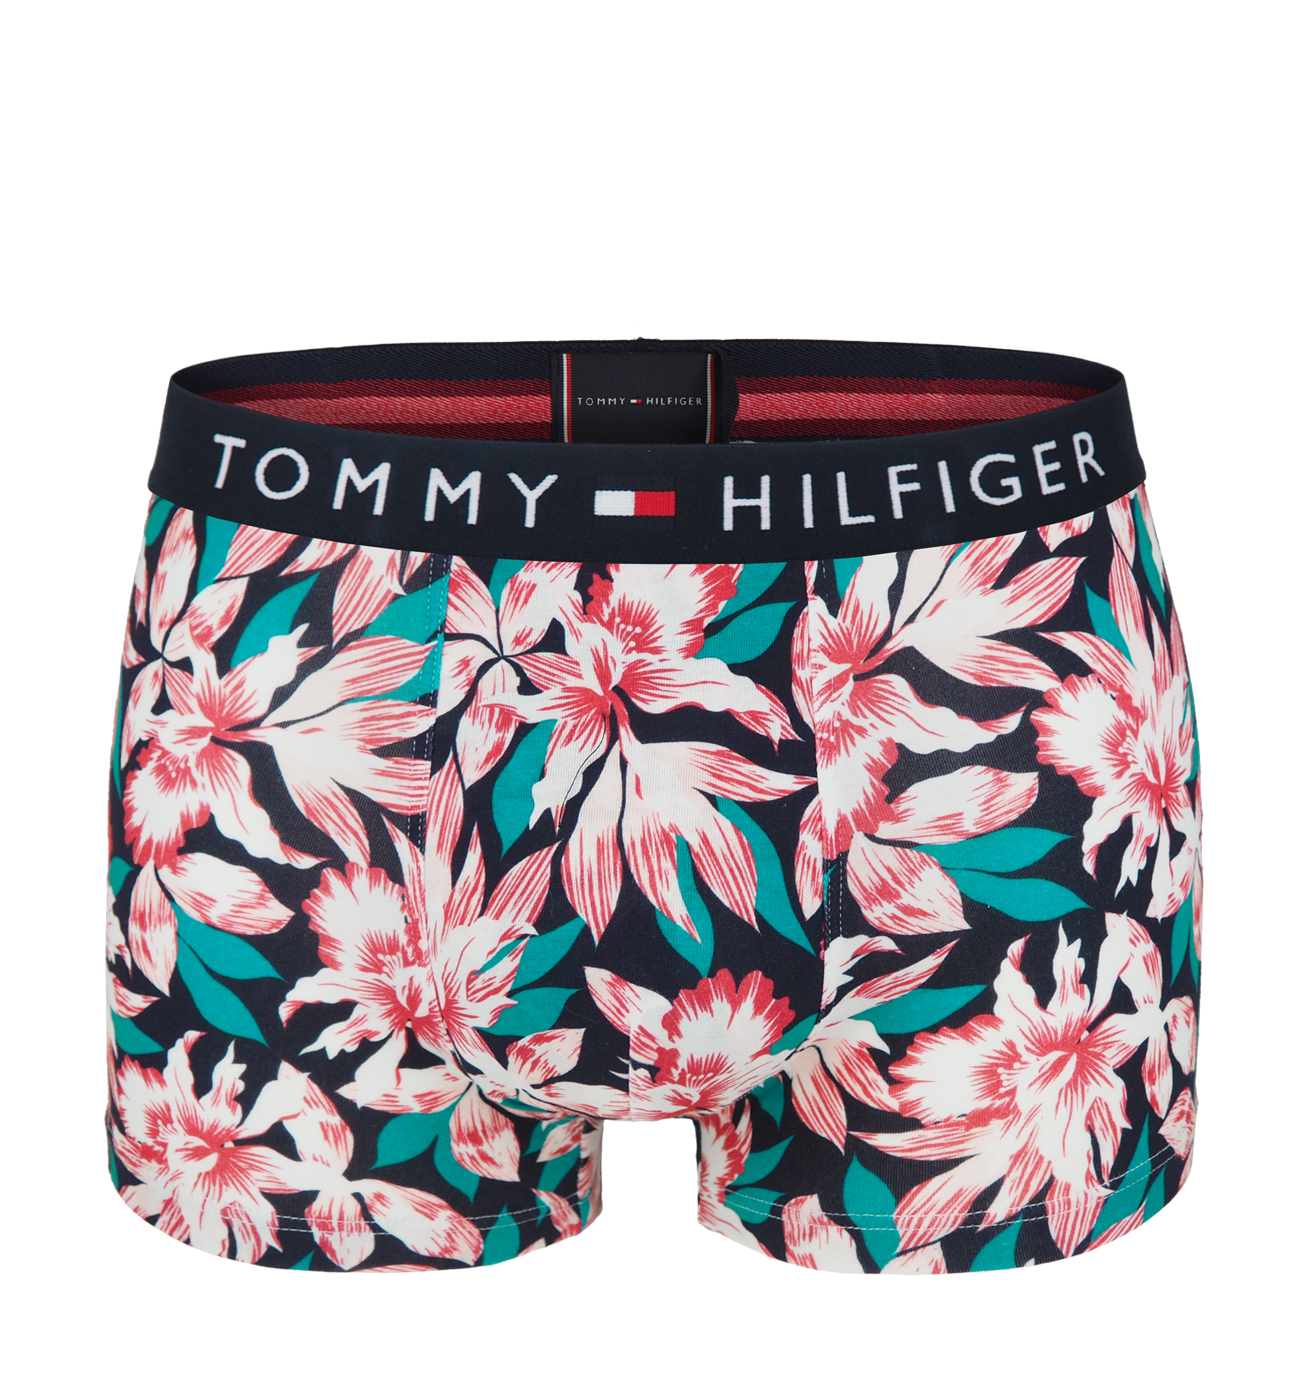 TOMMY HILFIGER - boxerky Tommy tropical florals